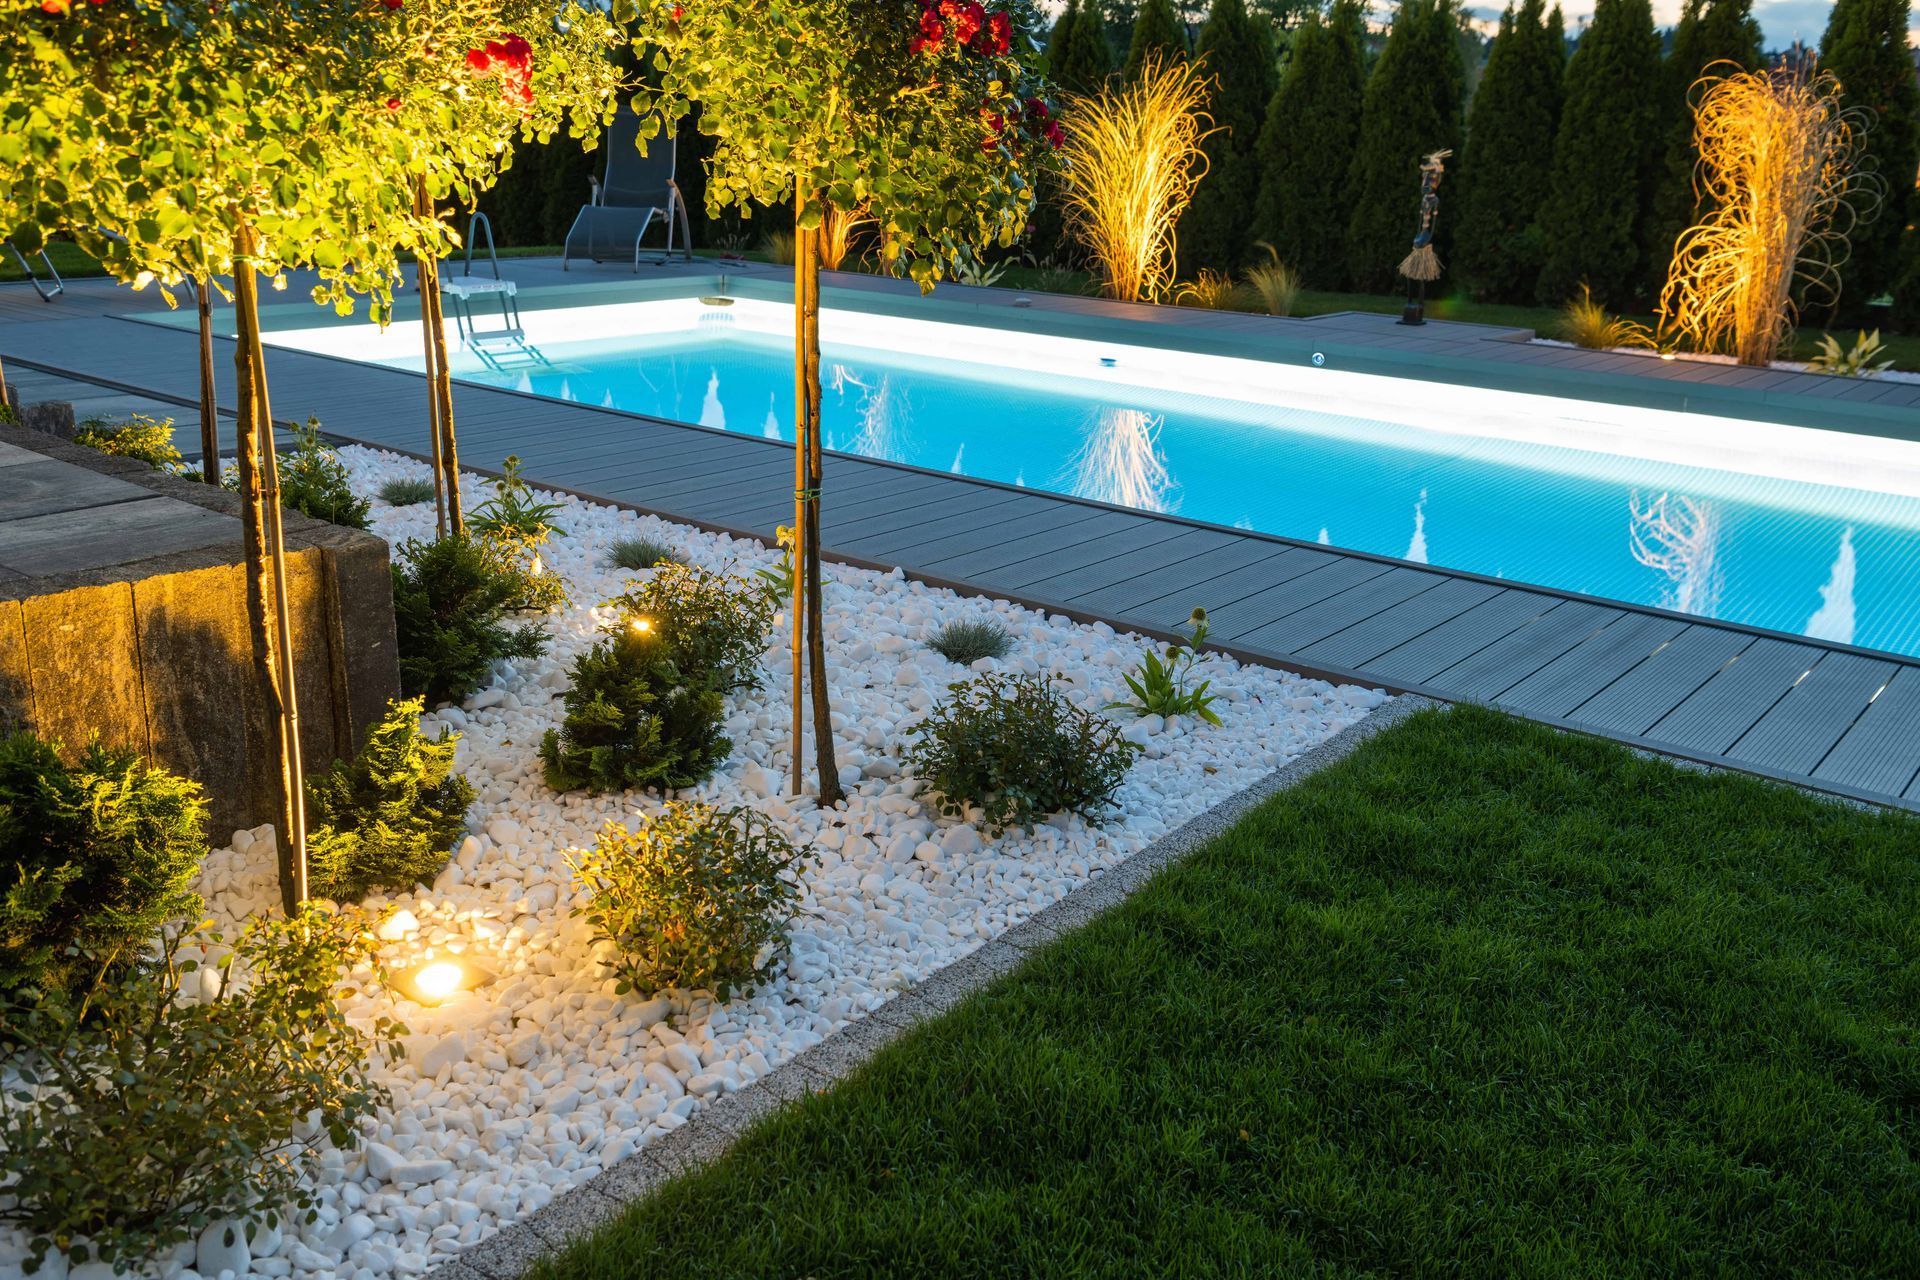 Pool landscaping picture